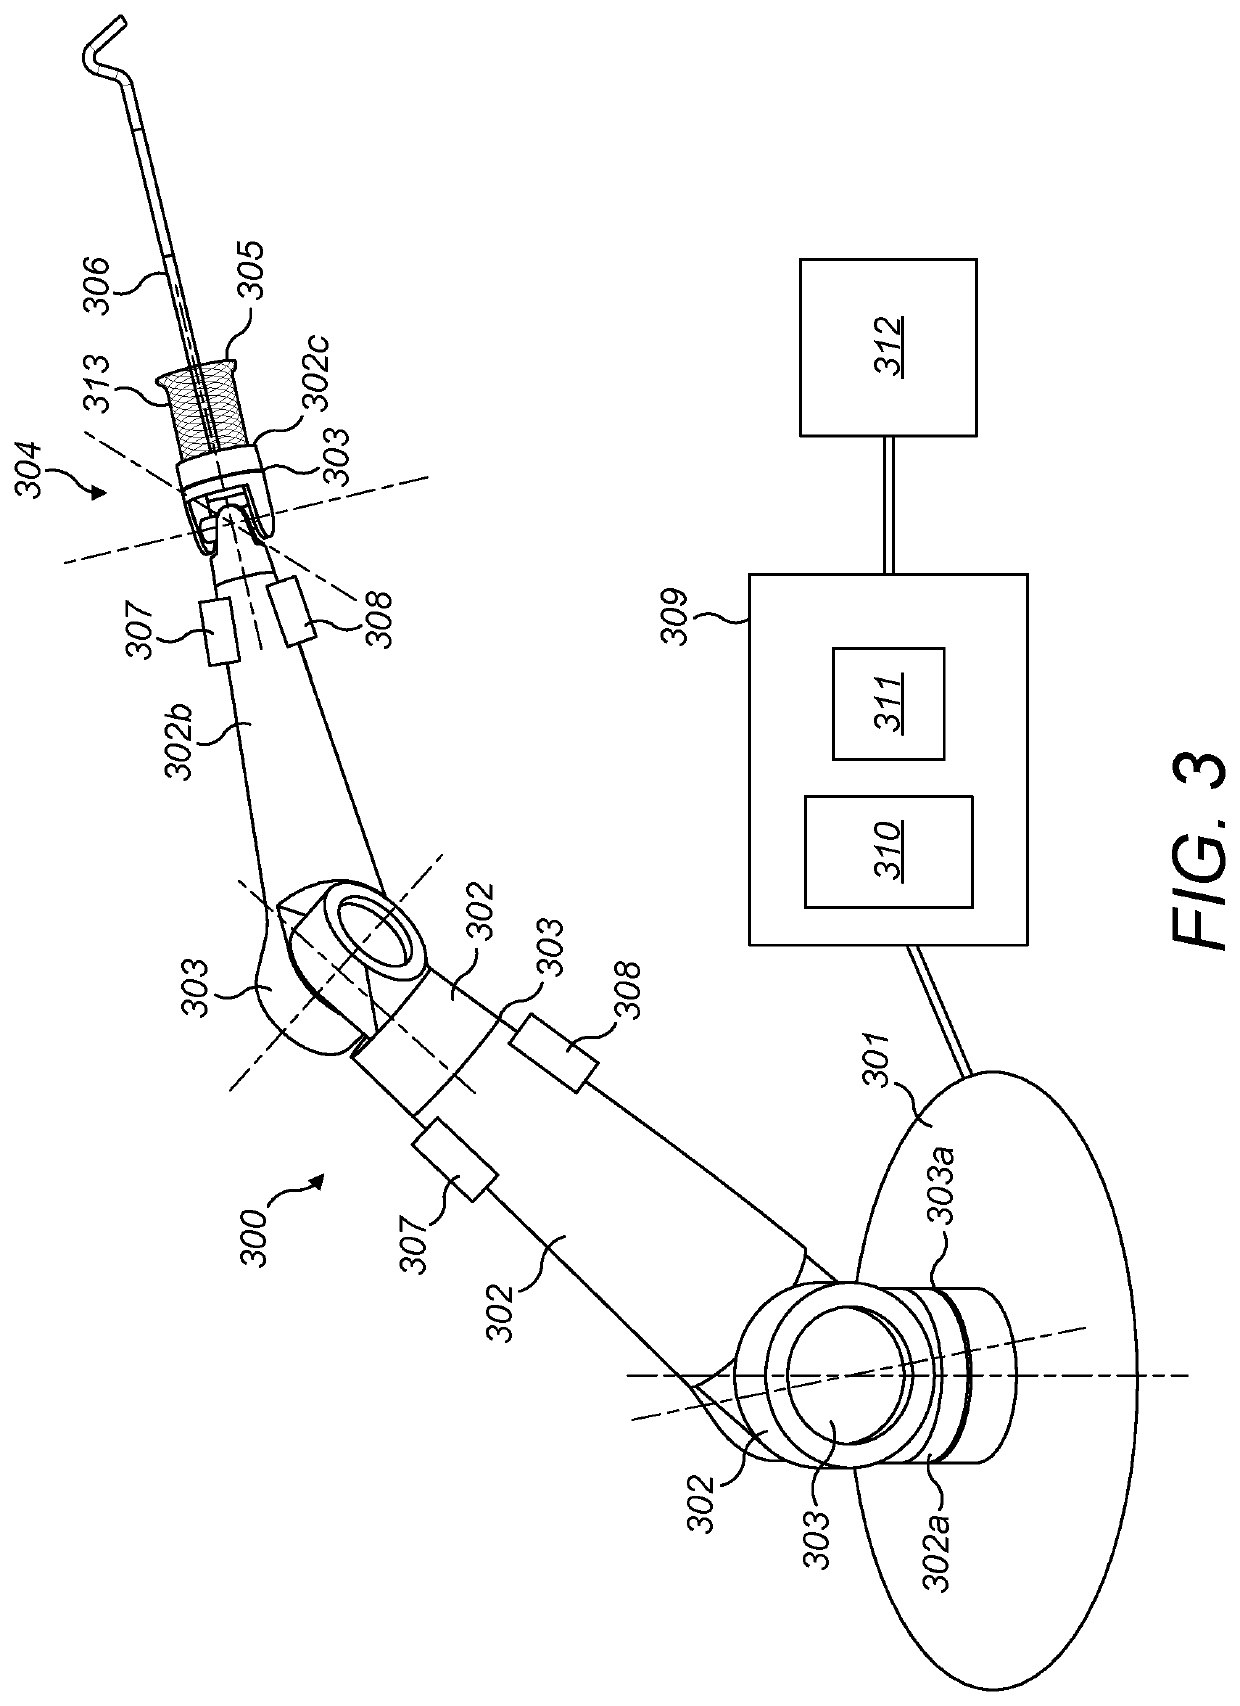 Powering a bipolar electrocautery surgical instrument